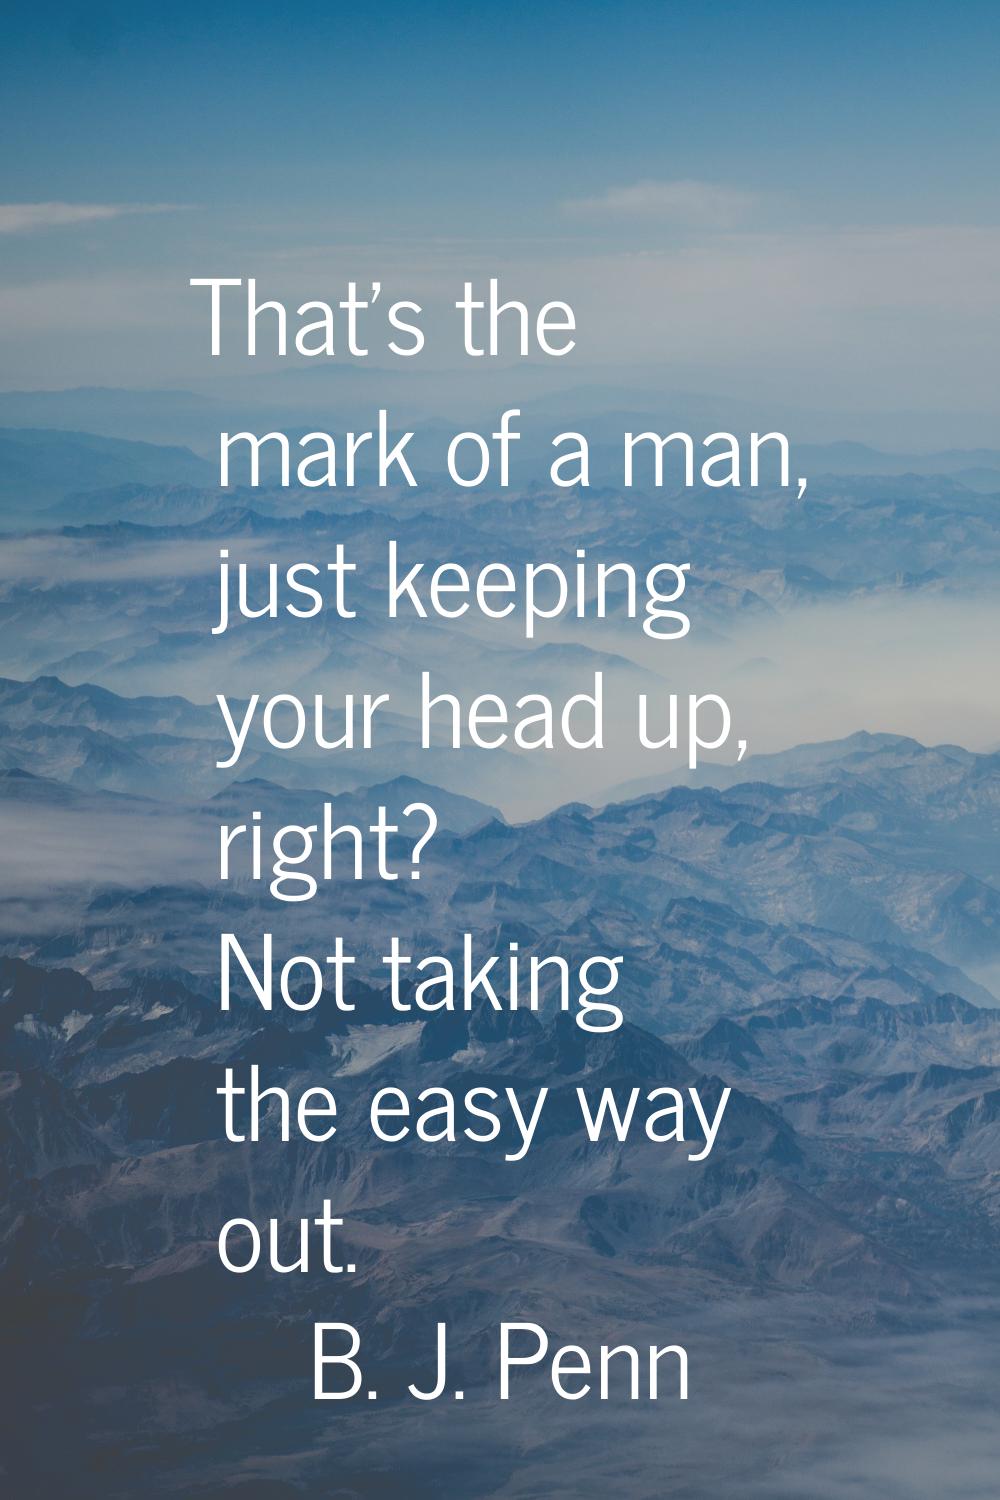 That's the mark of a man, just keeping your head up, right? Not taking the easy way out.